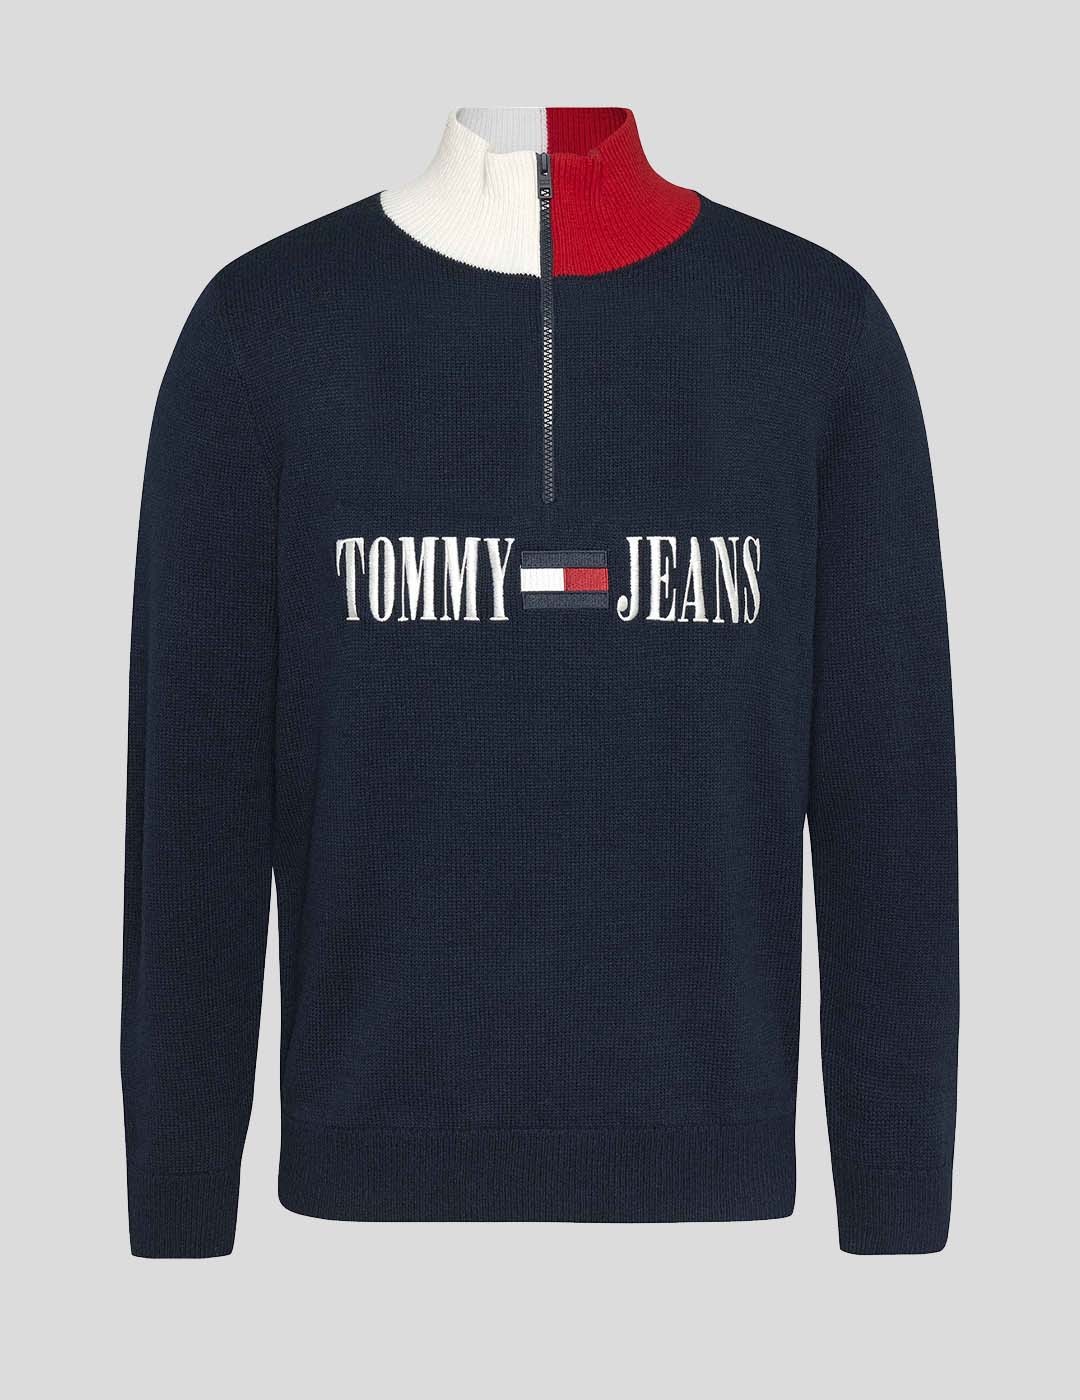 SUDADERA TOMMY JEANS SLIM ARCHIVE SWEATER  NAVY